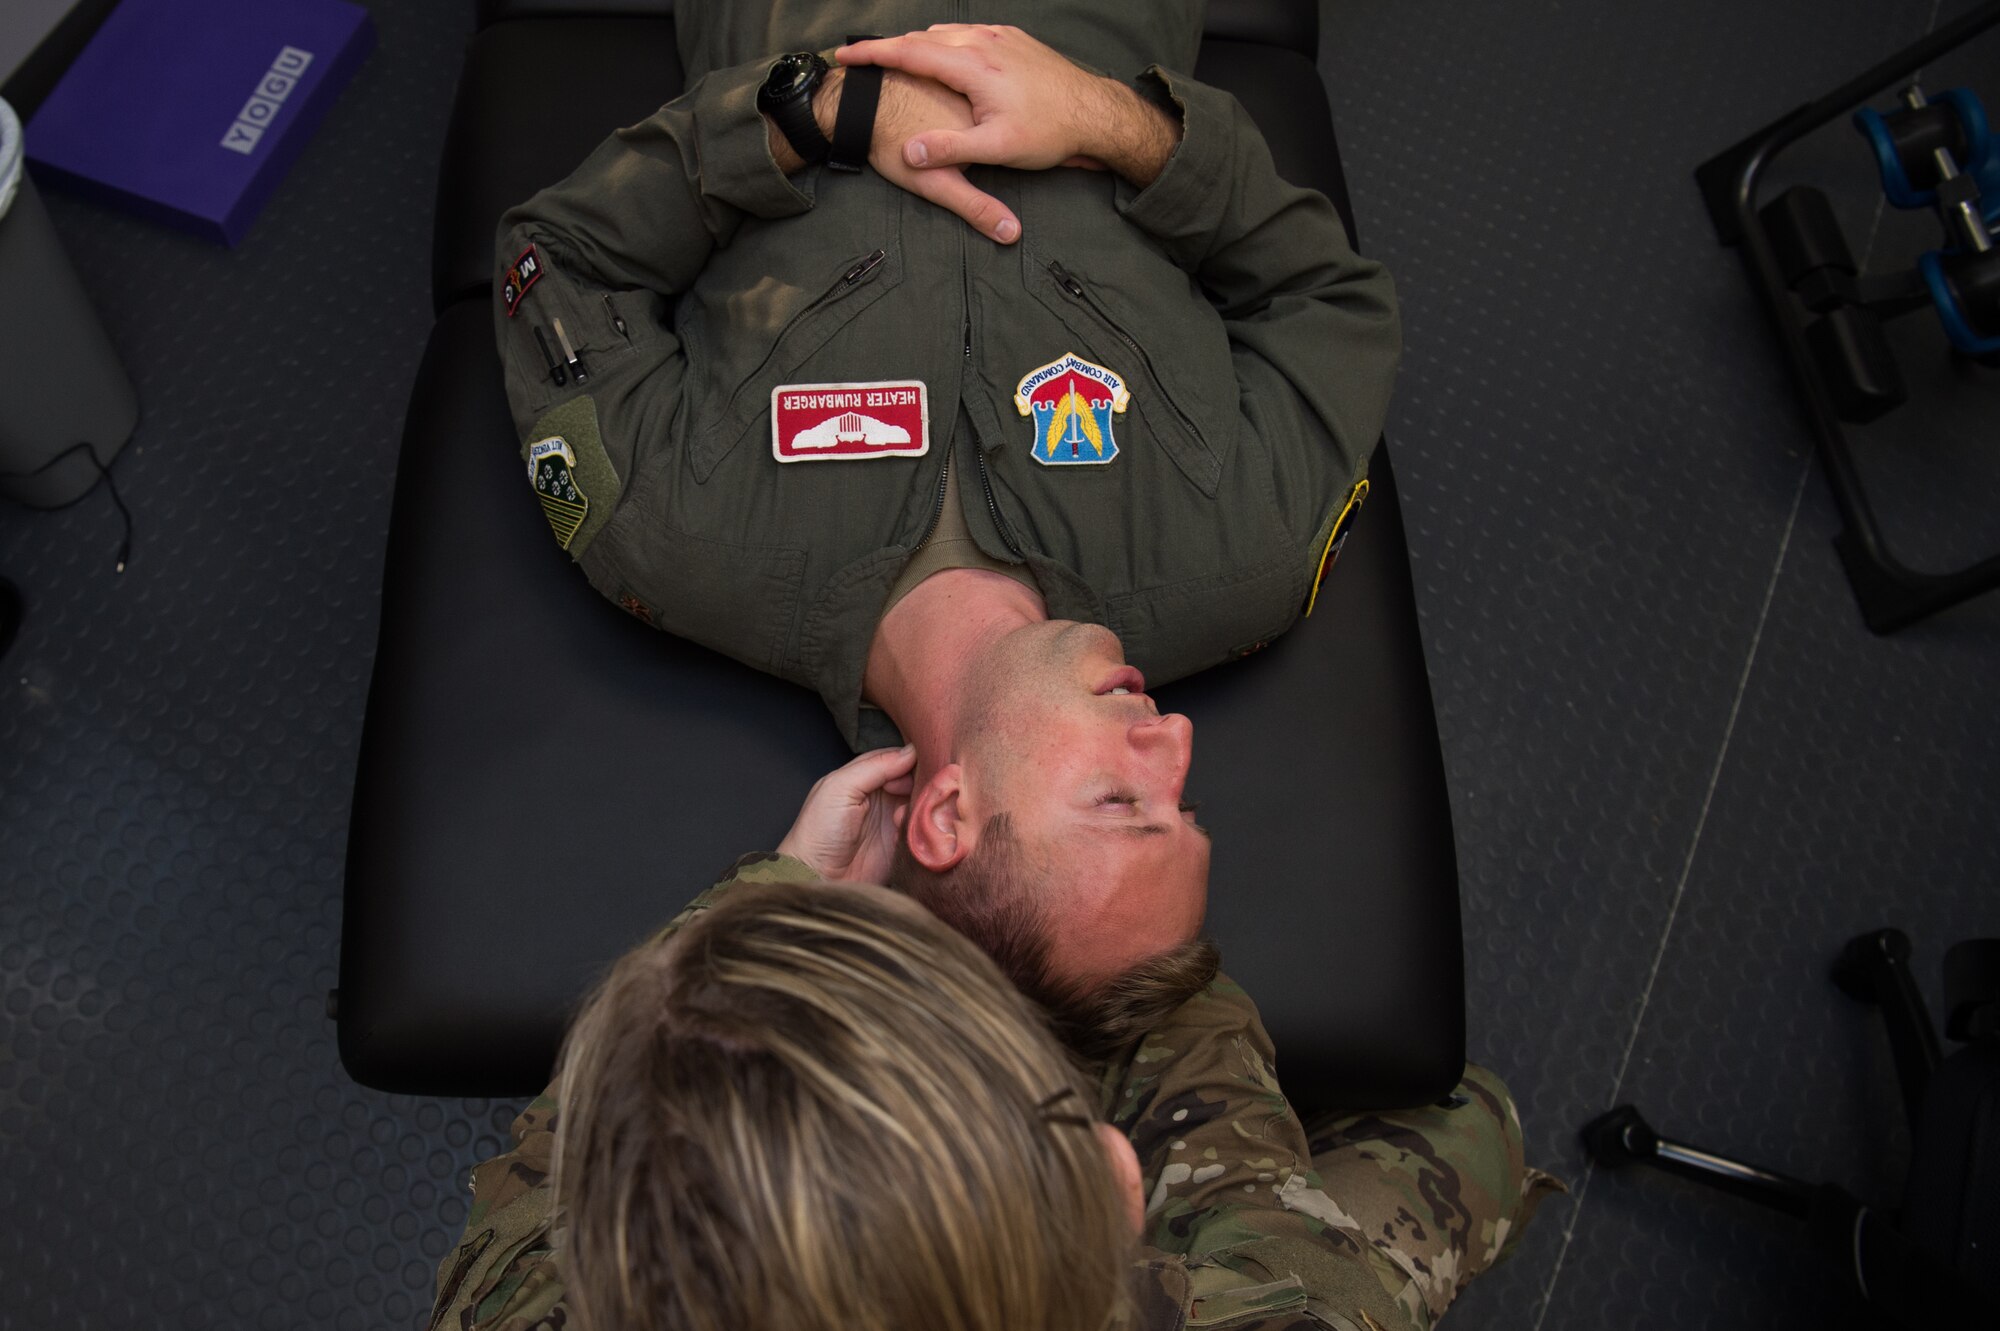 U.S. Air Force Capt. Michelle Jilek, 633rd Medical Operations Squadron physical therapist, examines Maj. Seth Rumbarger, 71st Fighter Squadron T-38 Talon pilot, at Joint Base Langley-Eustis, Virginia, Nov. 13, 2019. (U.S. Air Force photo by Senior Airman Tristan Biese)